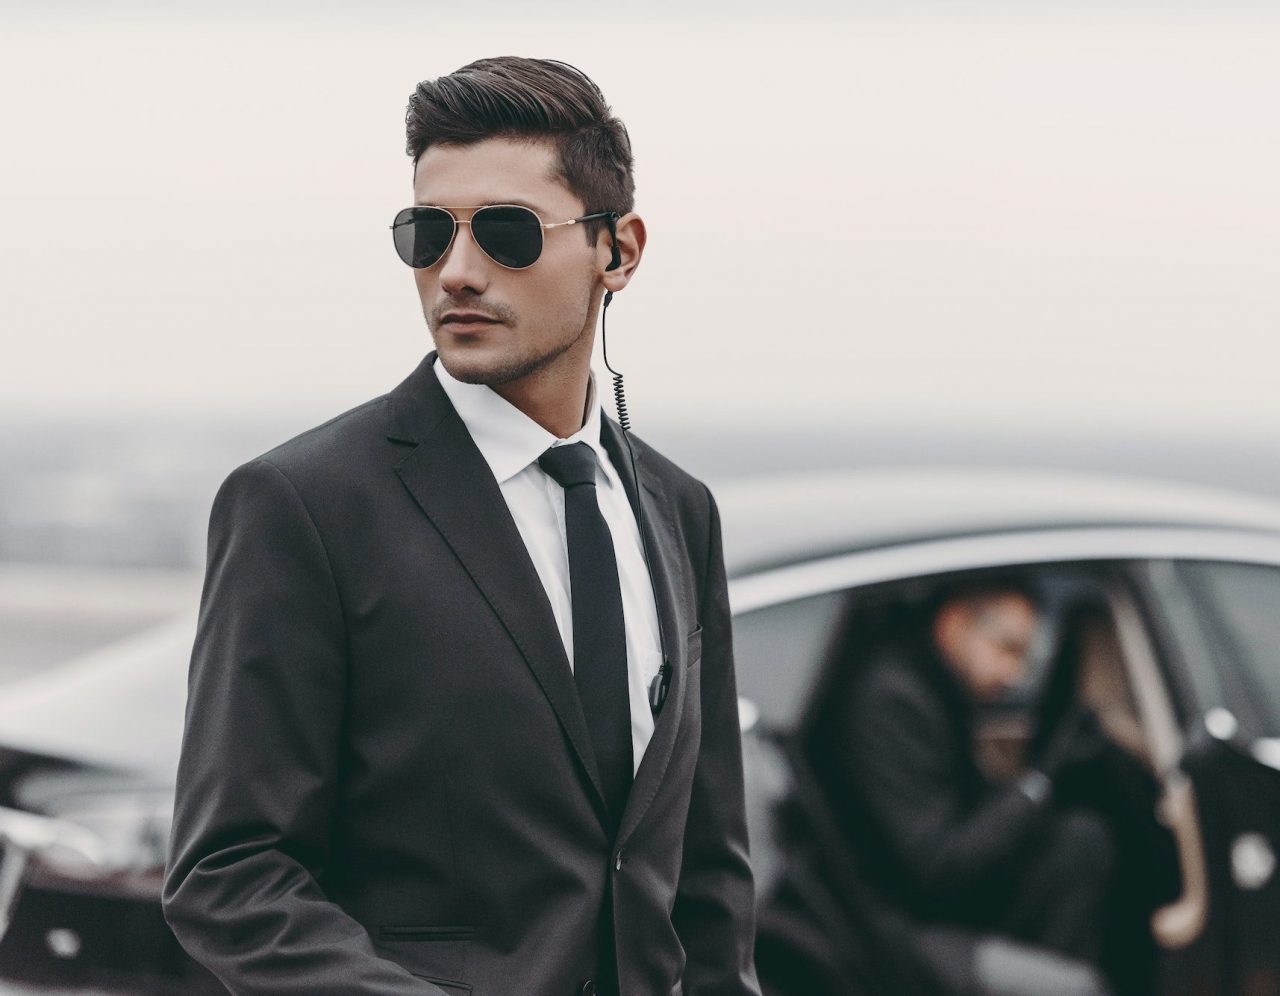 bodyguard reviewing territory while businessman going out from car e1668055044863